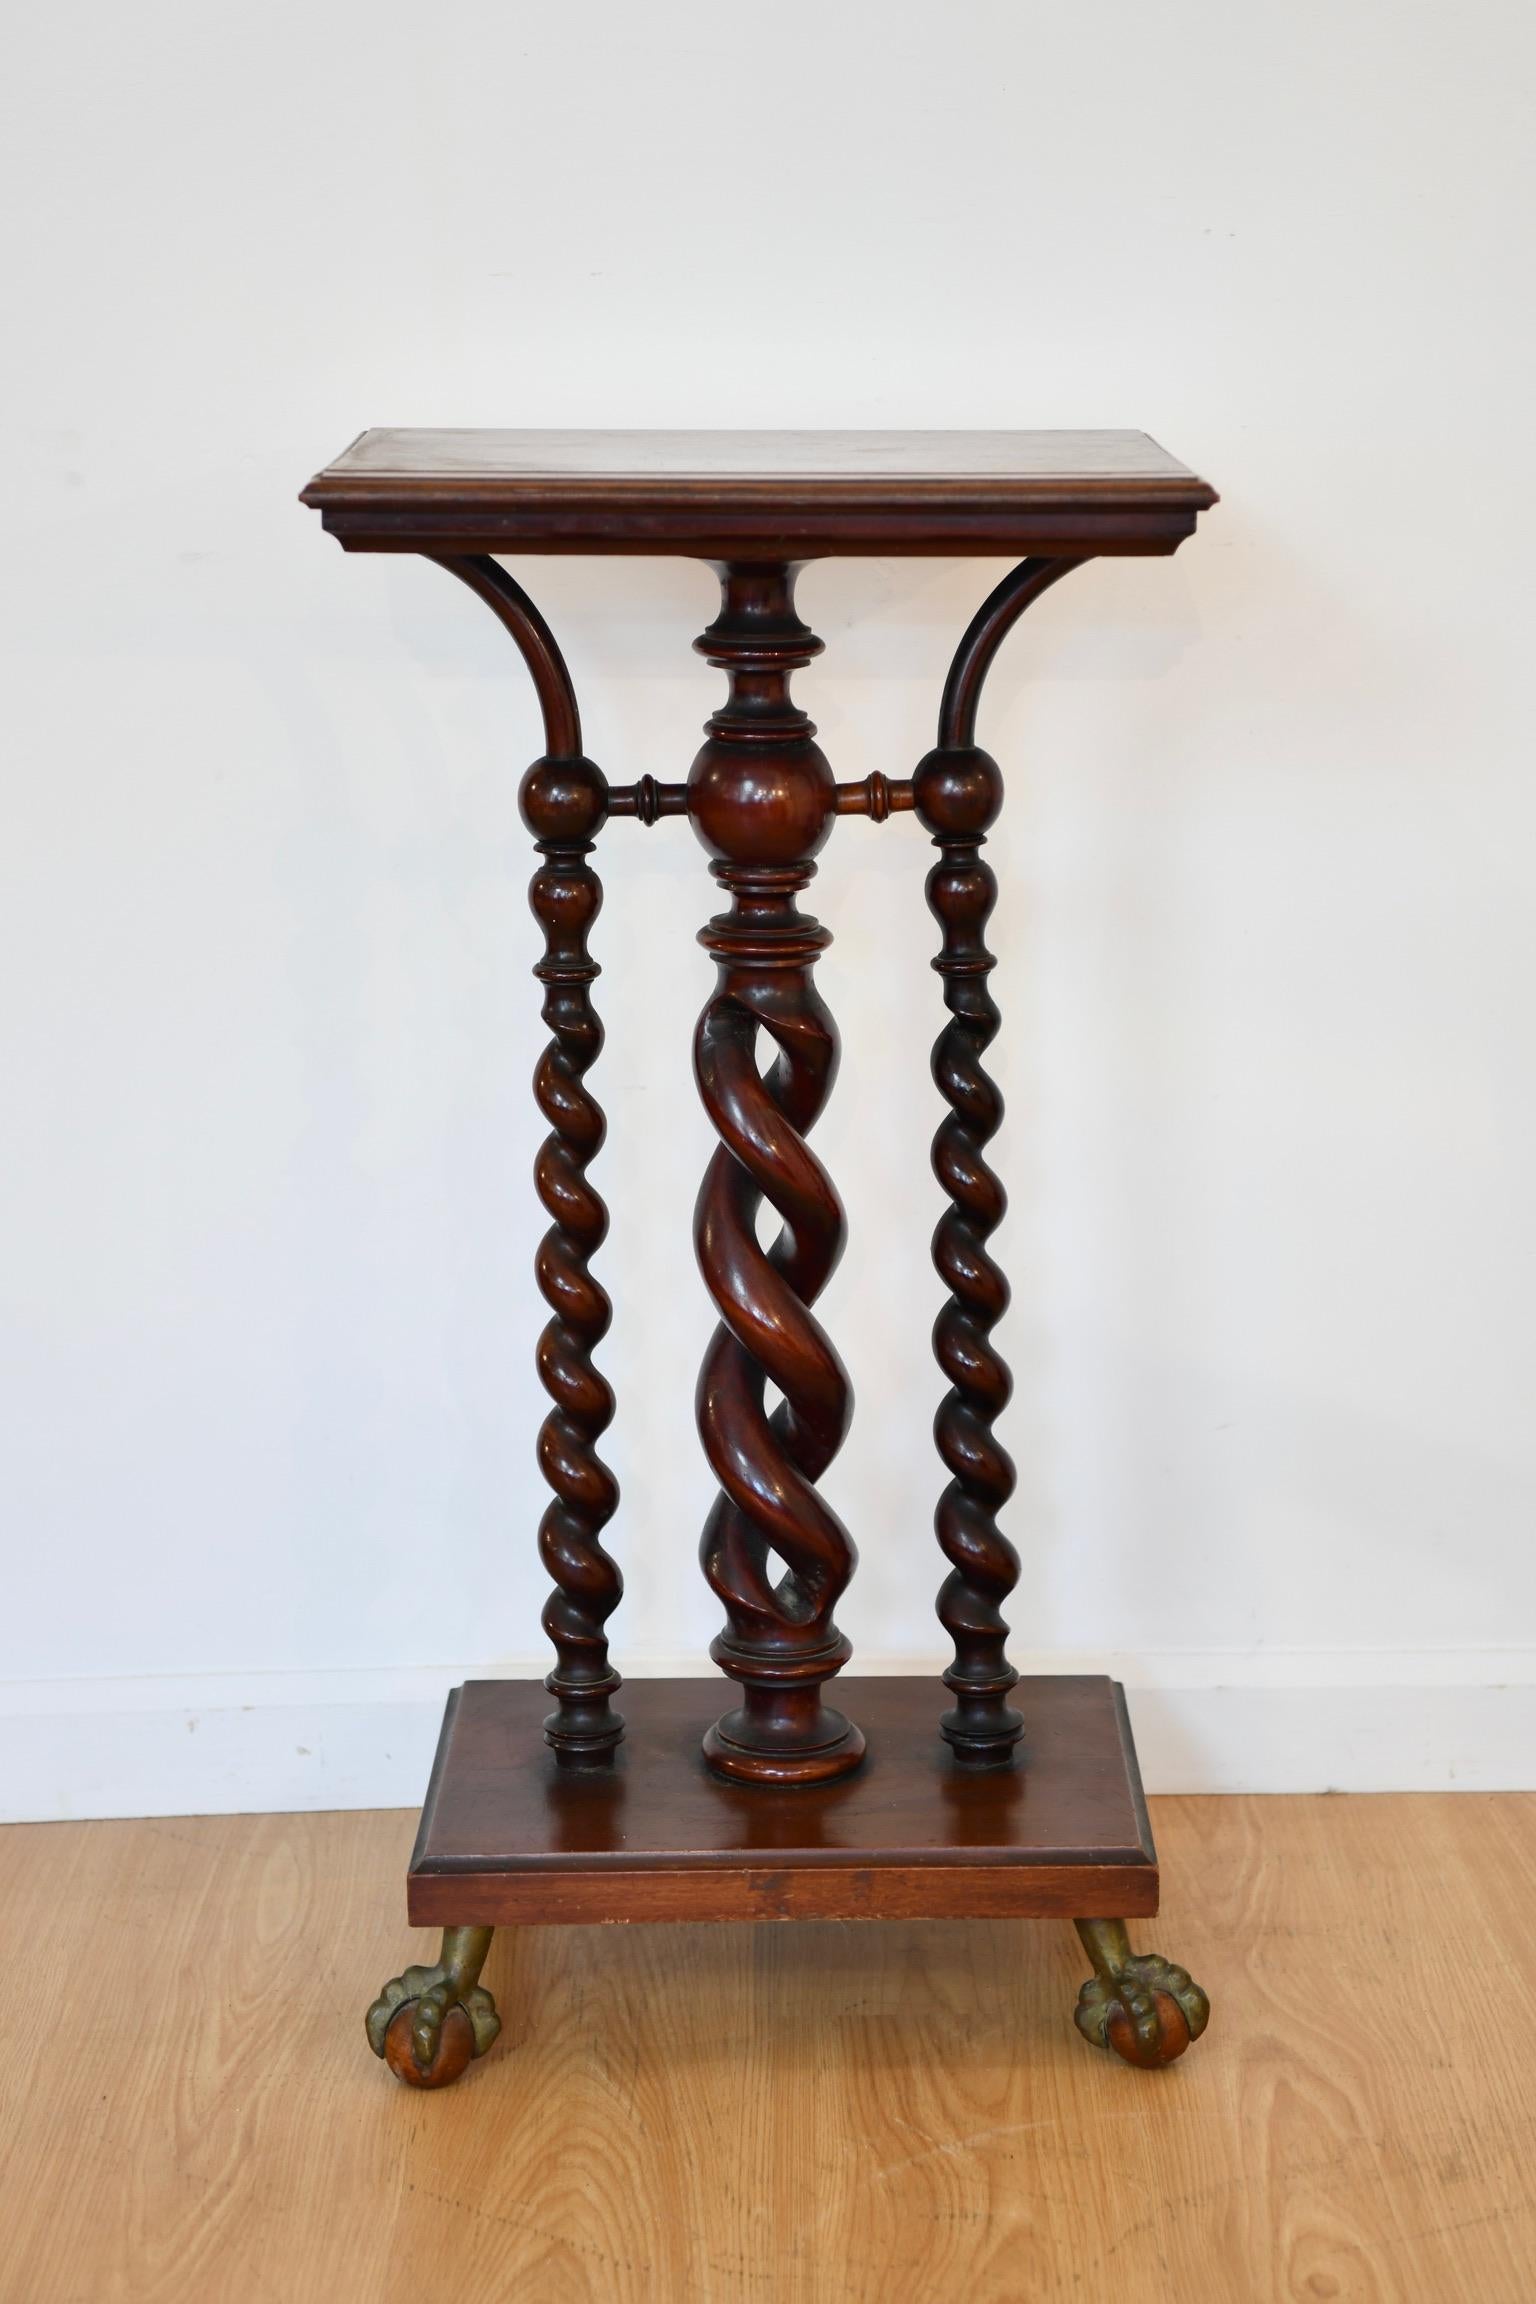 Antique rope twist mahogany pedestal with ball and claw feet, attributed to Merklen Bros or Horner Hunzinger. Dimensions: 17